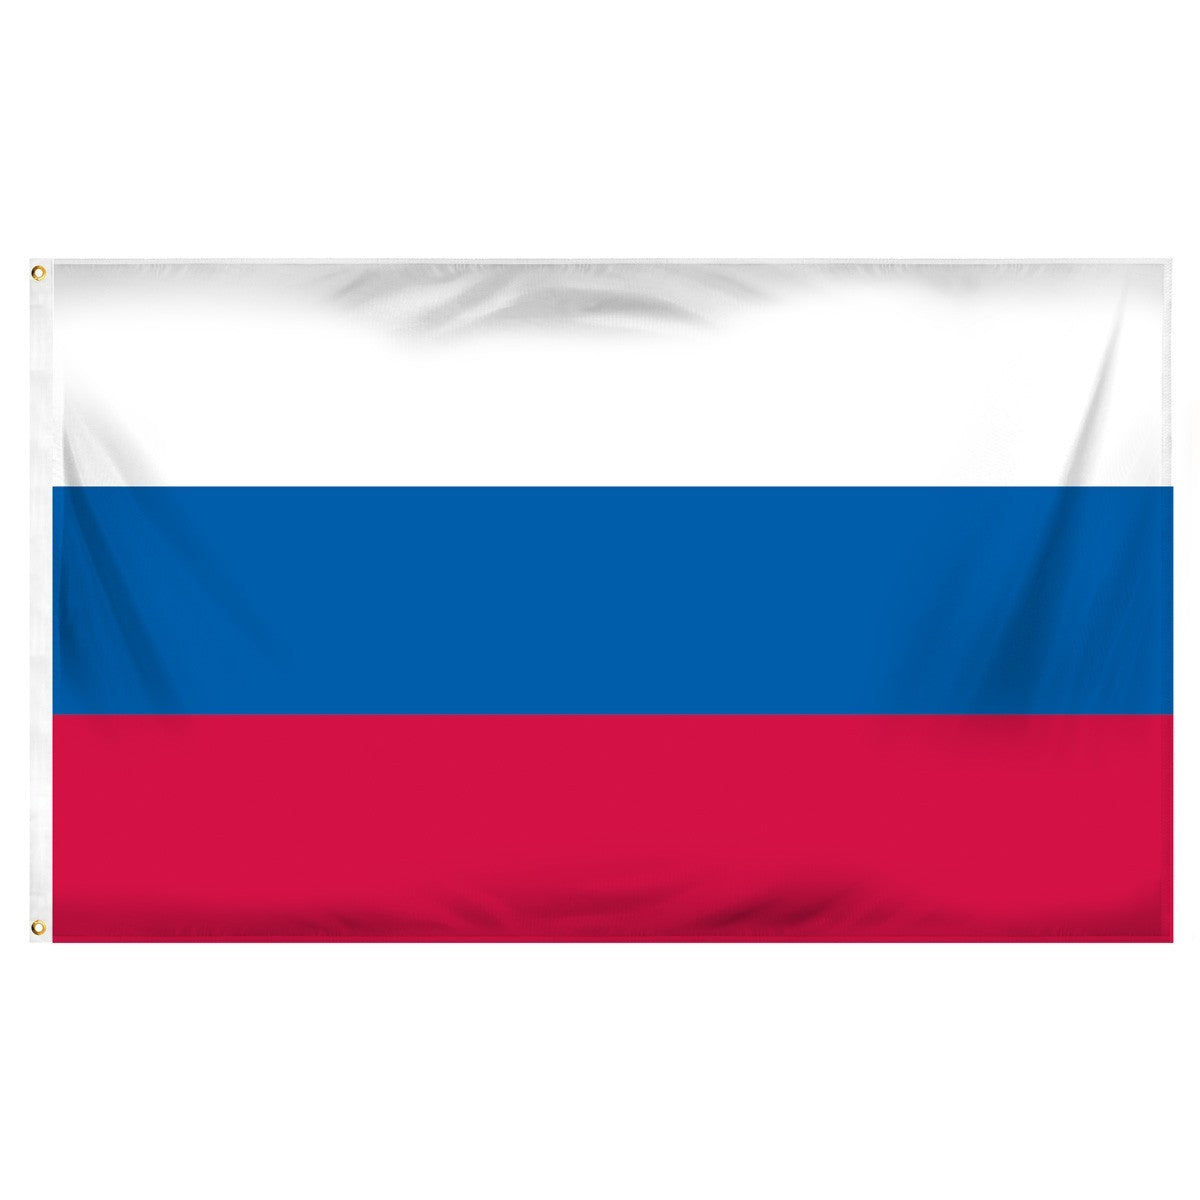 Russia 3' x 5' Indoor International Polyester Flag